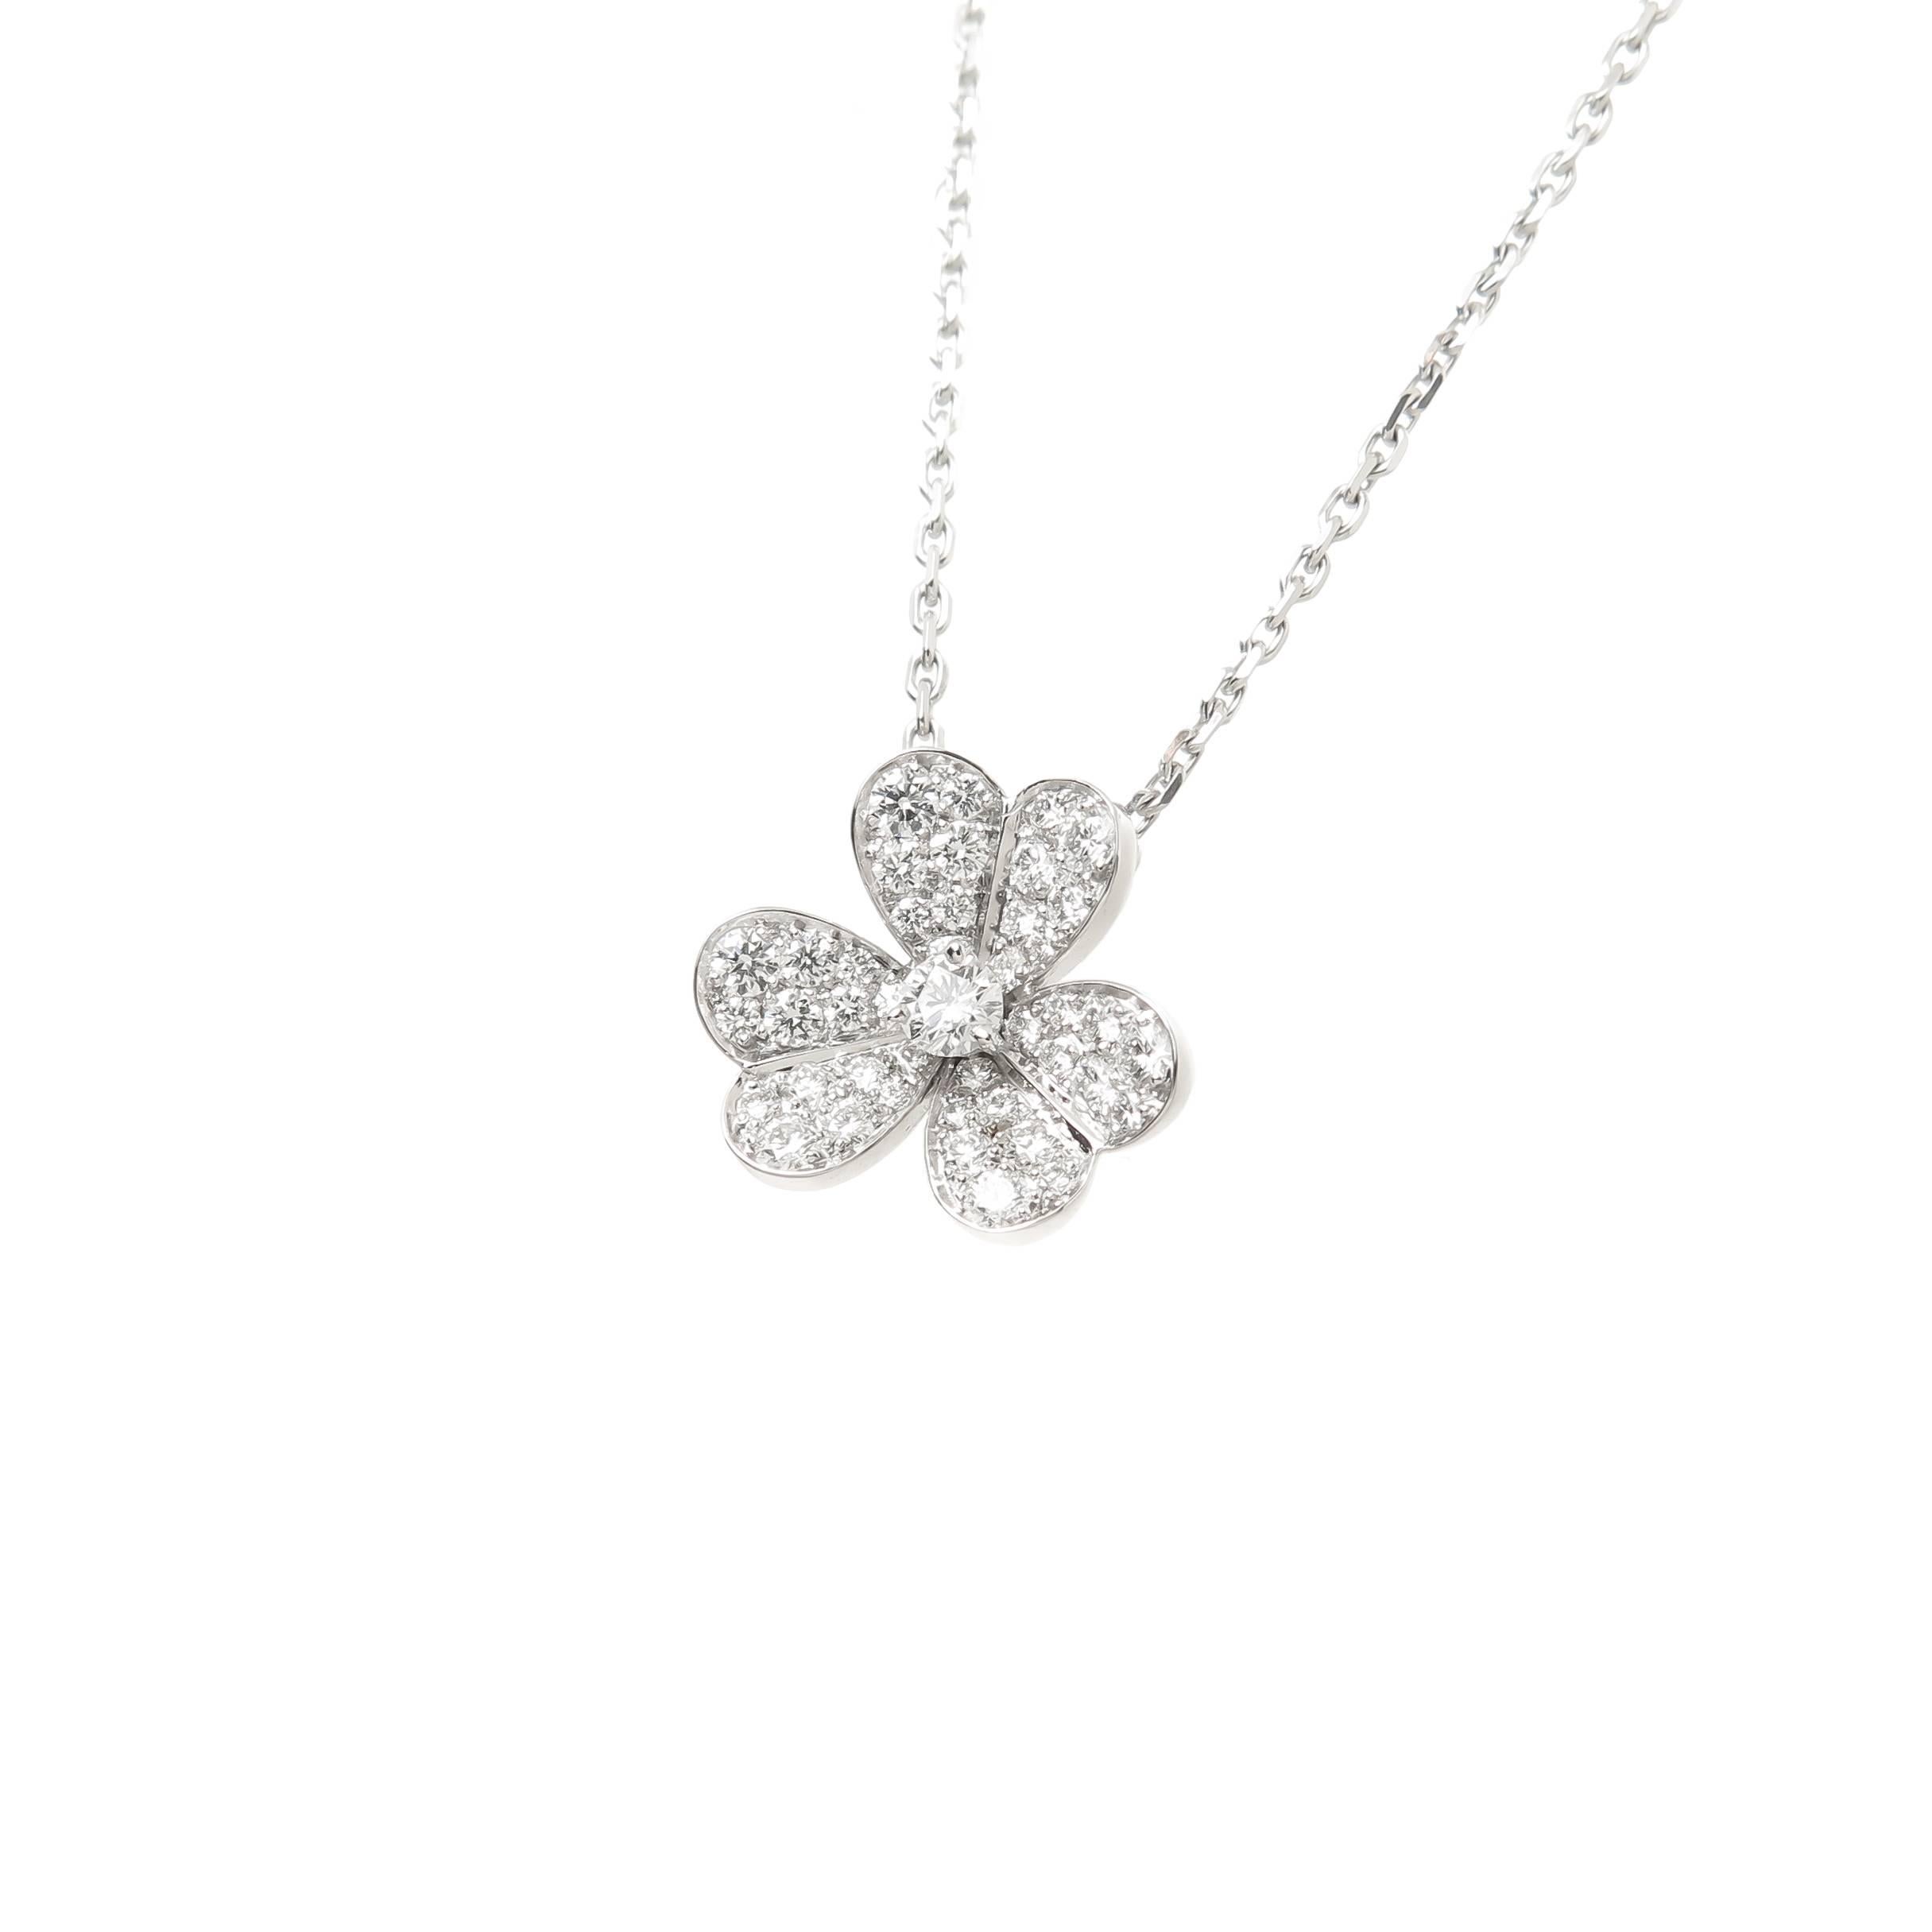 Circa 2009 Van Cleef and Arpels Frivole Collection 18k White Gold Flower Pendant. Measuring 15 X 15 MM and suspended from a 16 inch chain. Set with round Brilliant cut Diamonds totaling .80 Carat, grading as F in color and VVS in Clarity.  Excellent